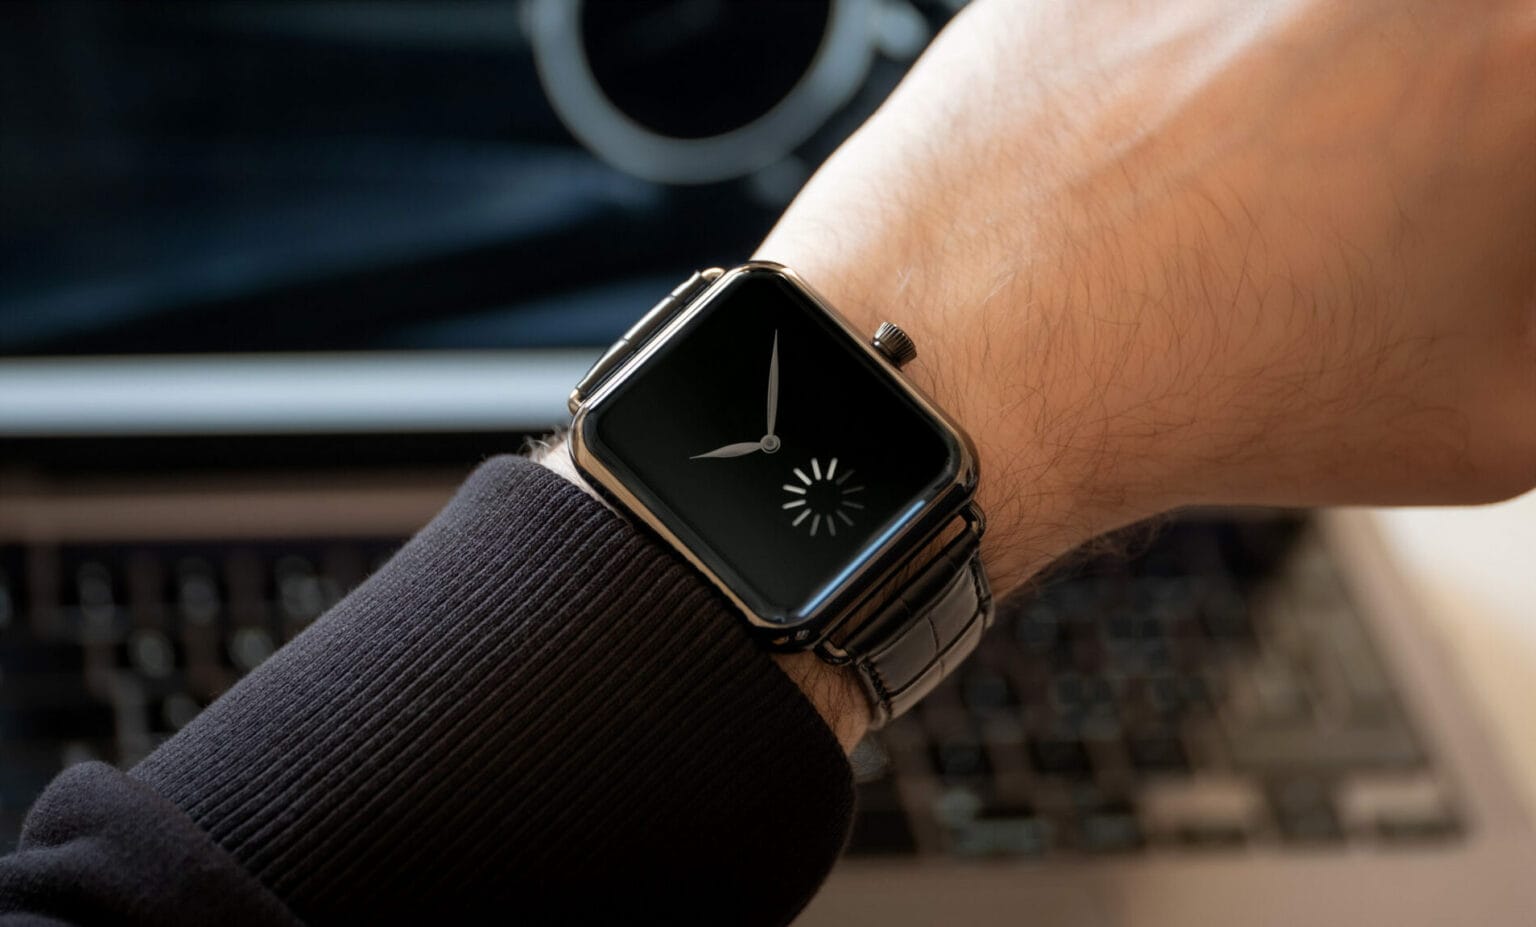 H. Moser & Cie.'s $30,800 Apple Watch spoof: What better way to thumb your nose at Apple Watch wearers?